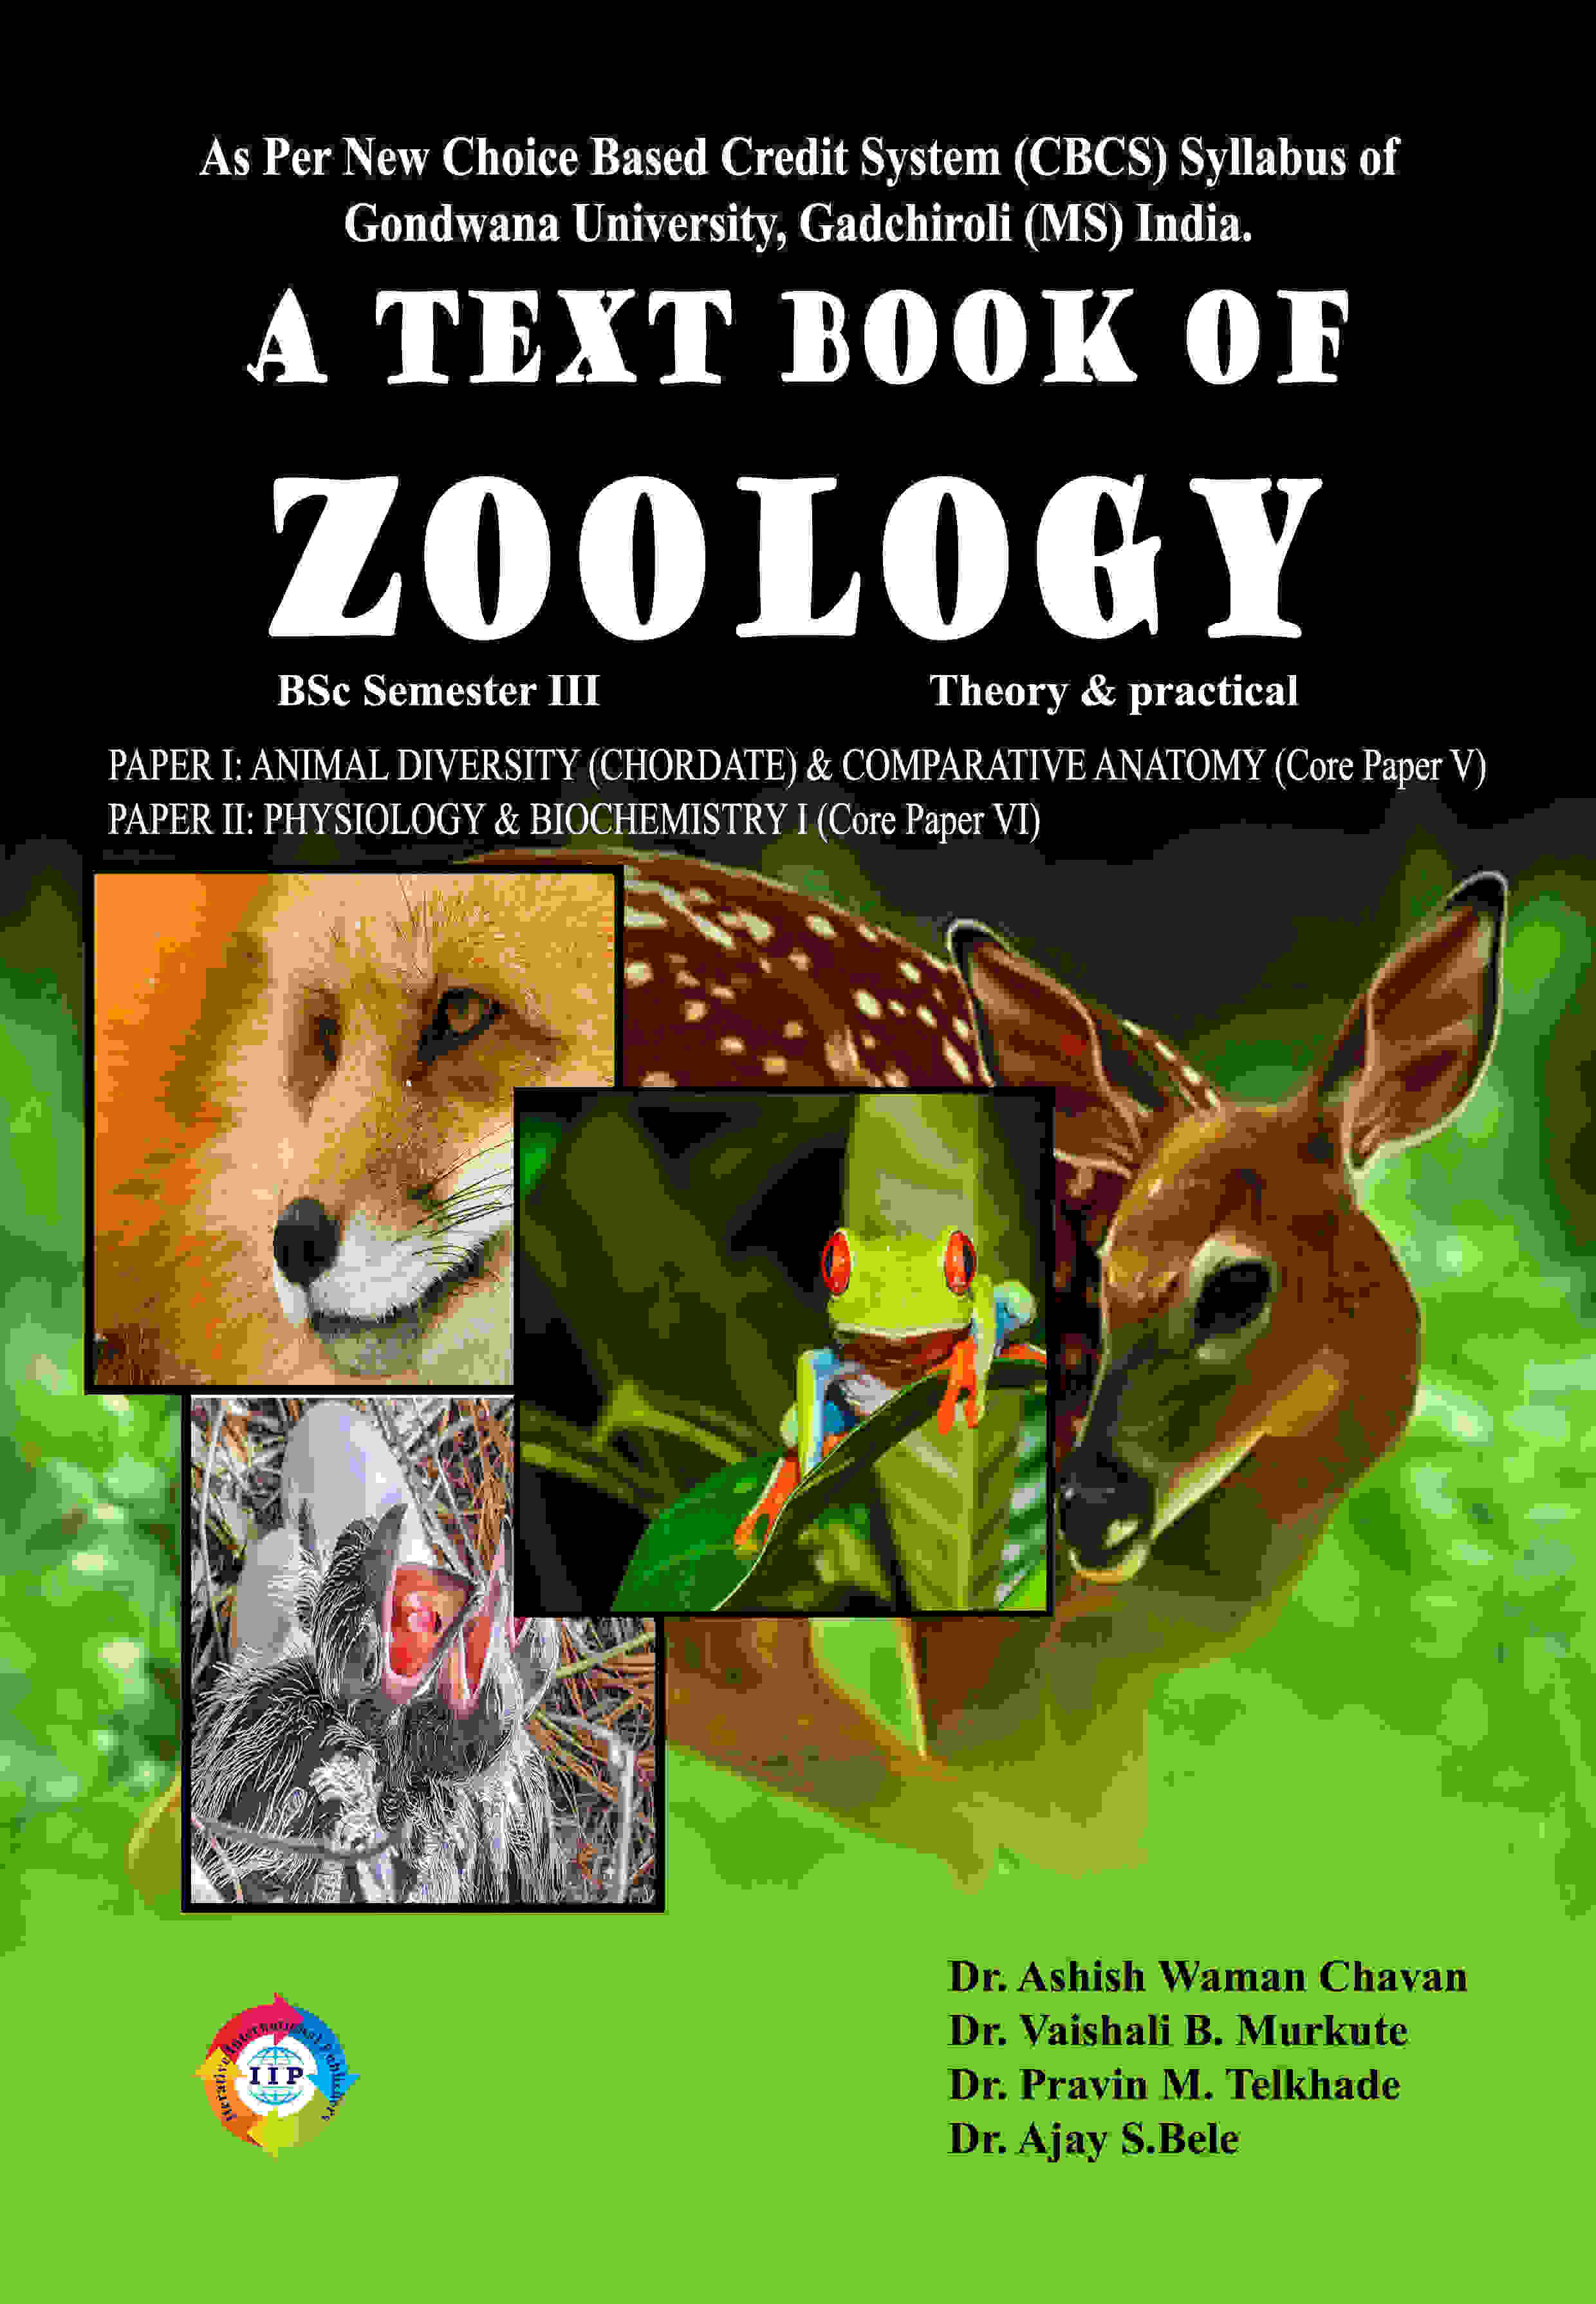 TEXT BOOK OF ZOOLOGY